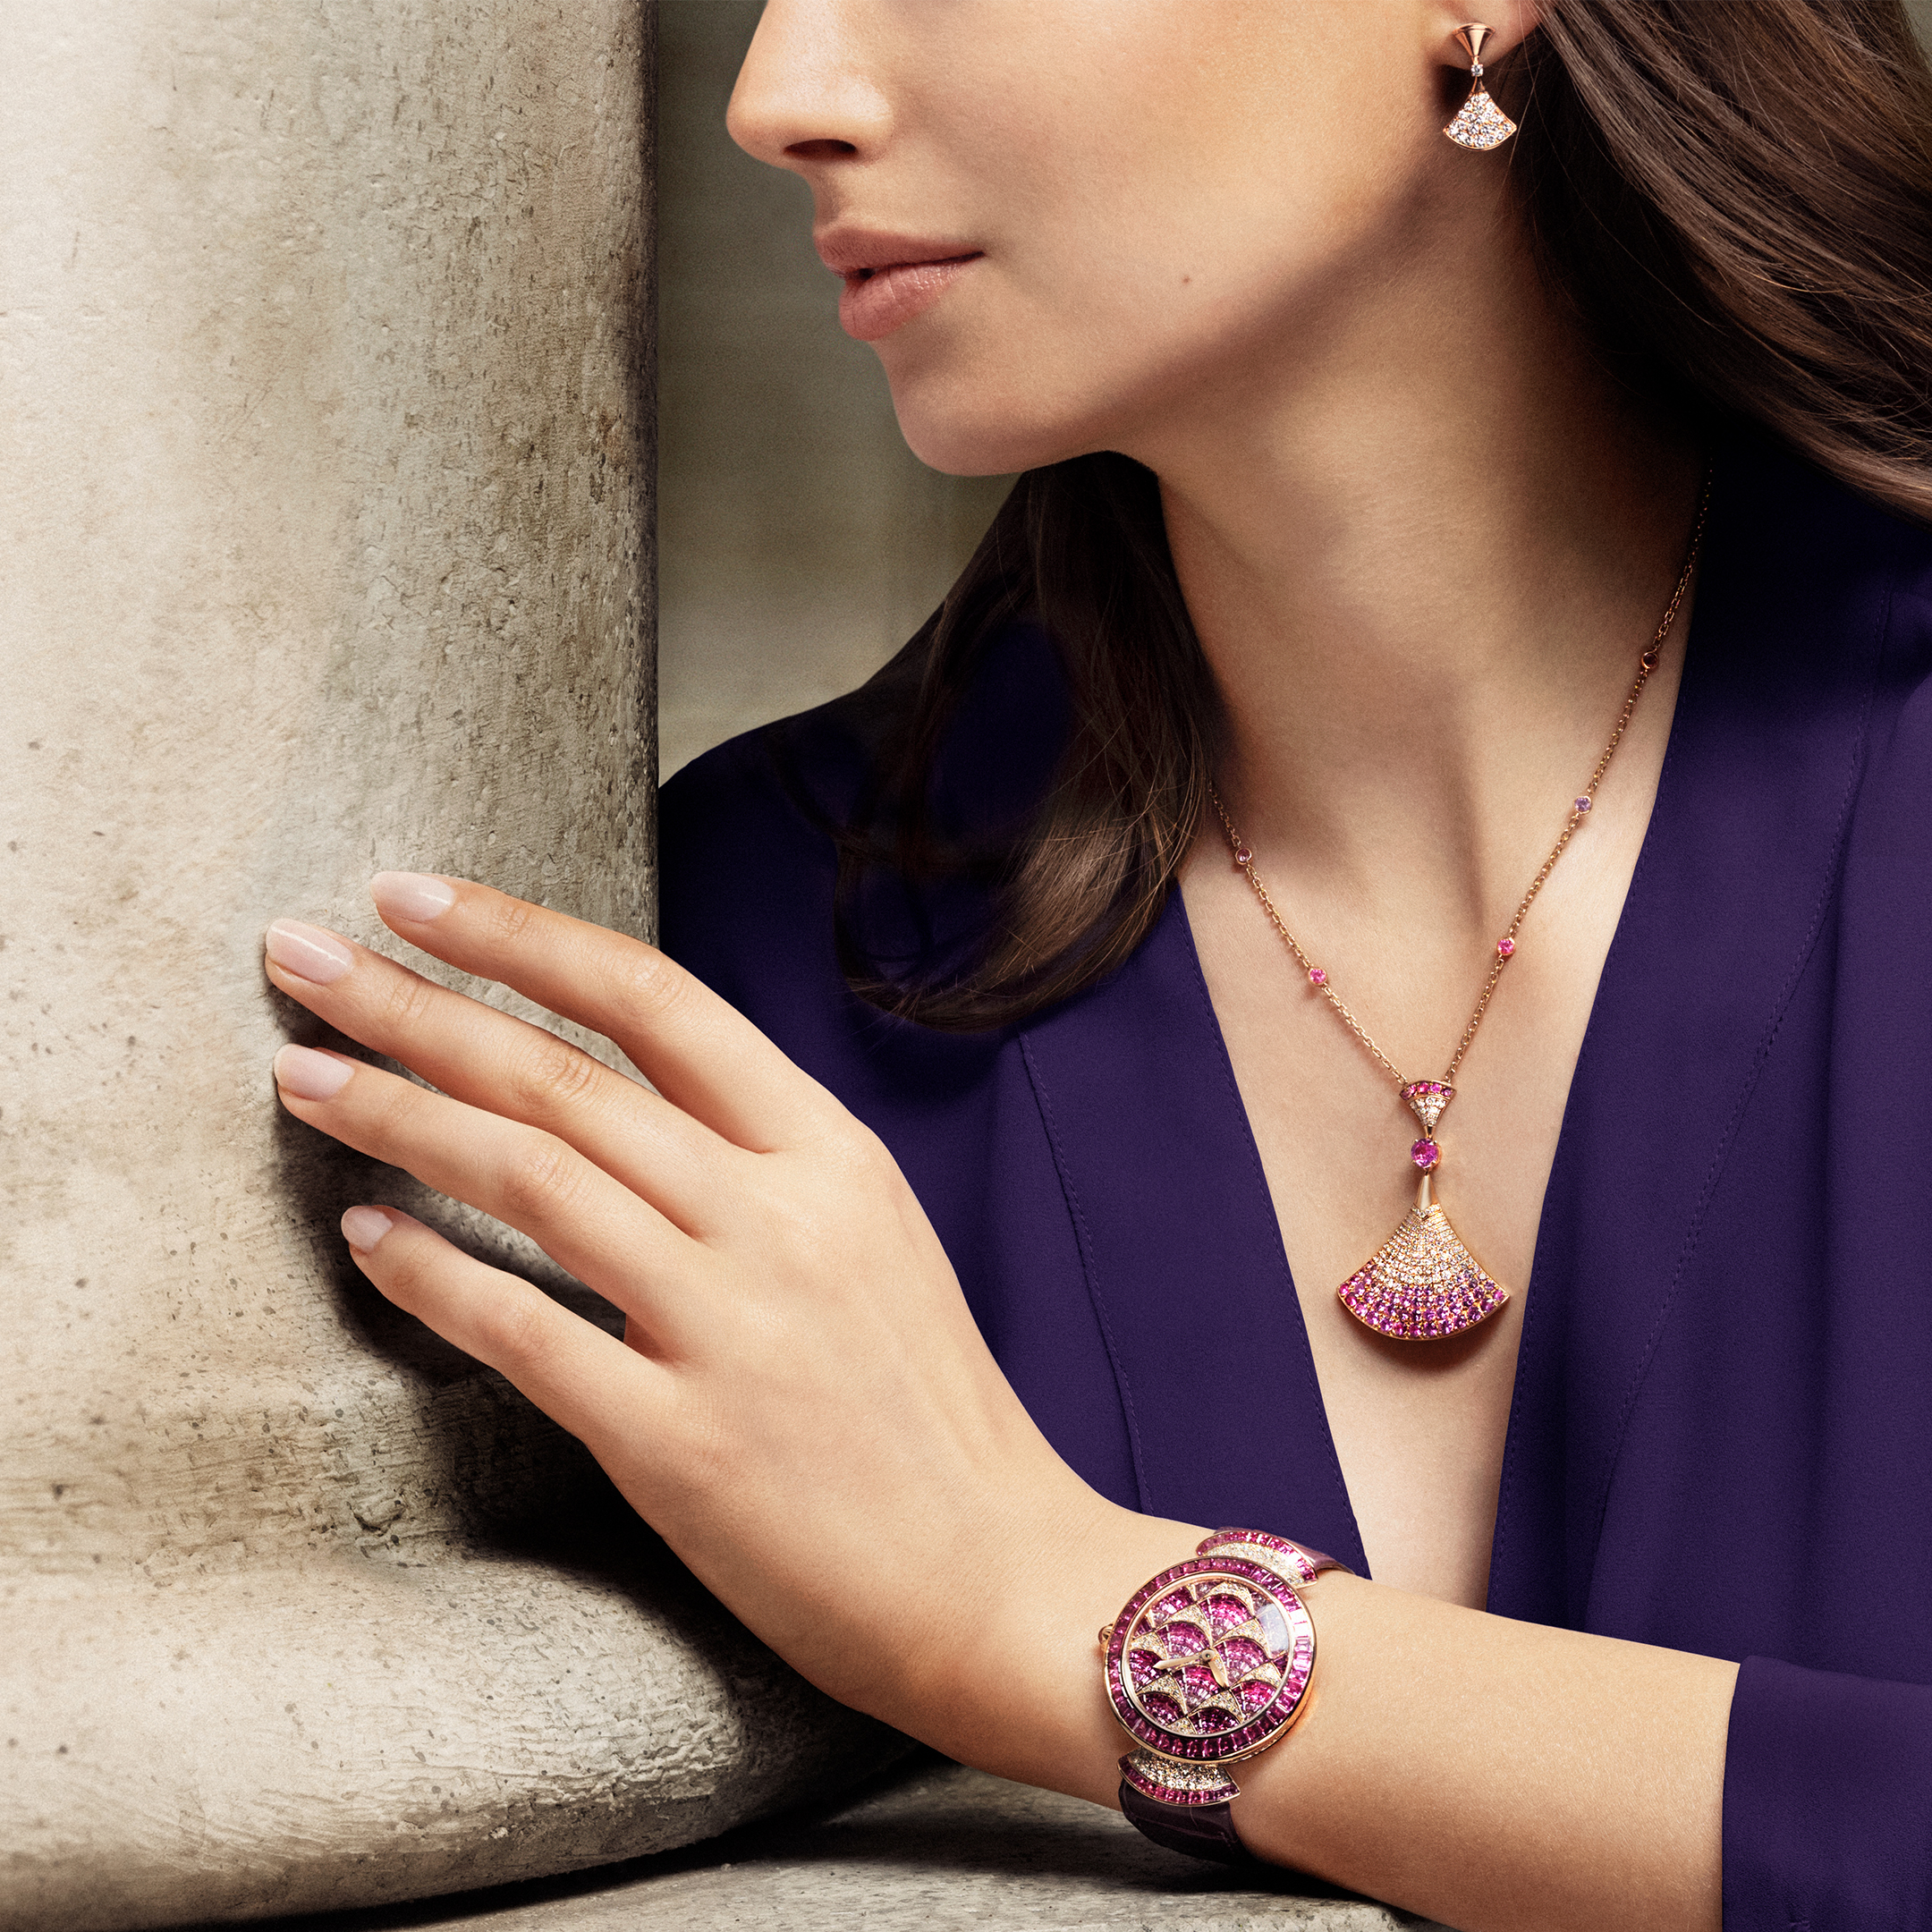 DFS unveils exclusive launch of Bulgari jewellery collection